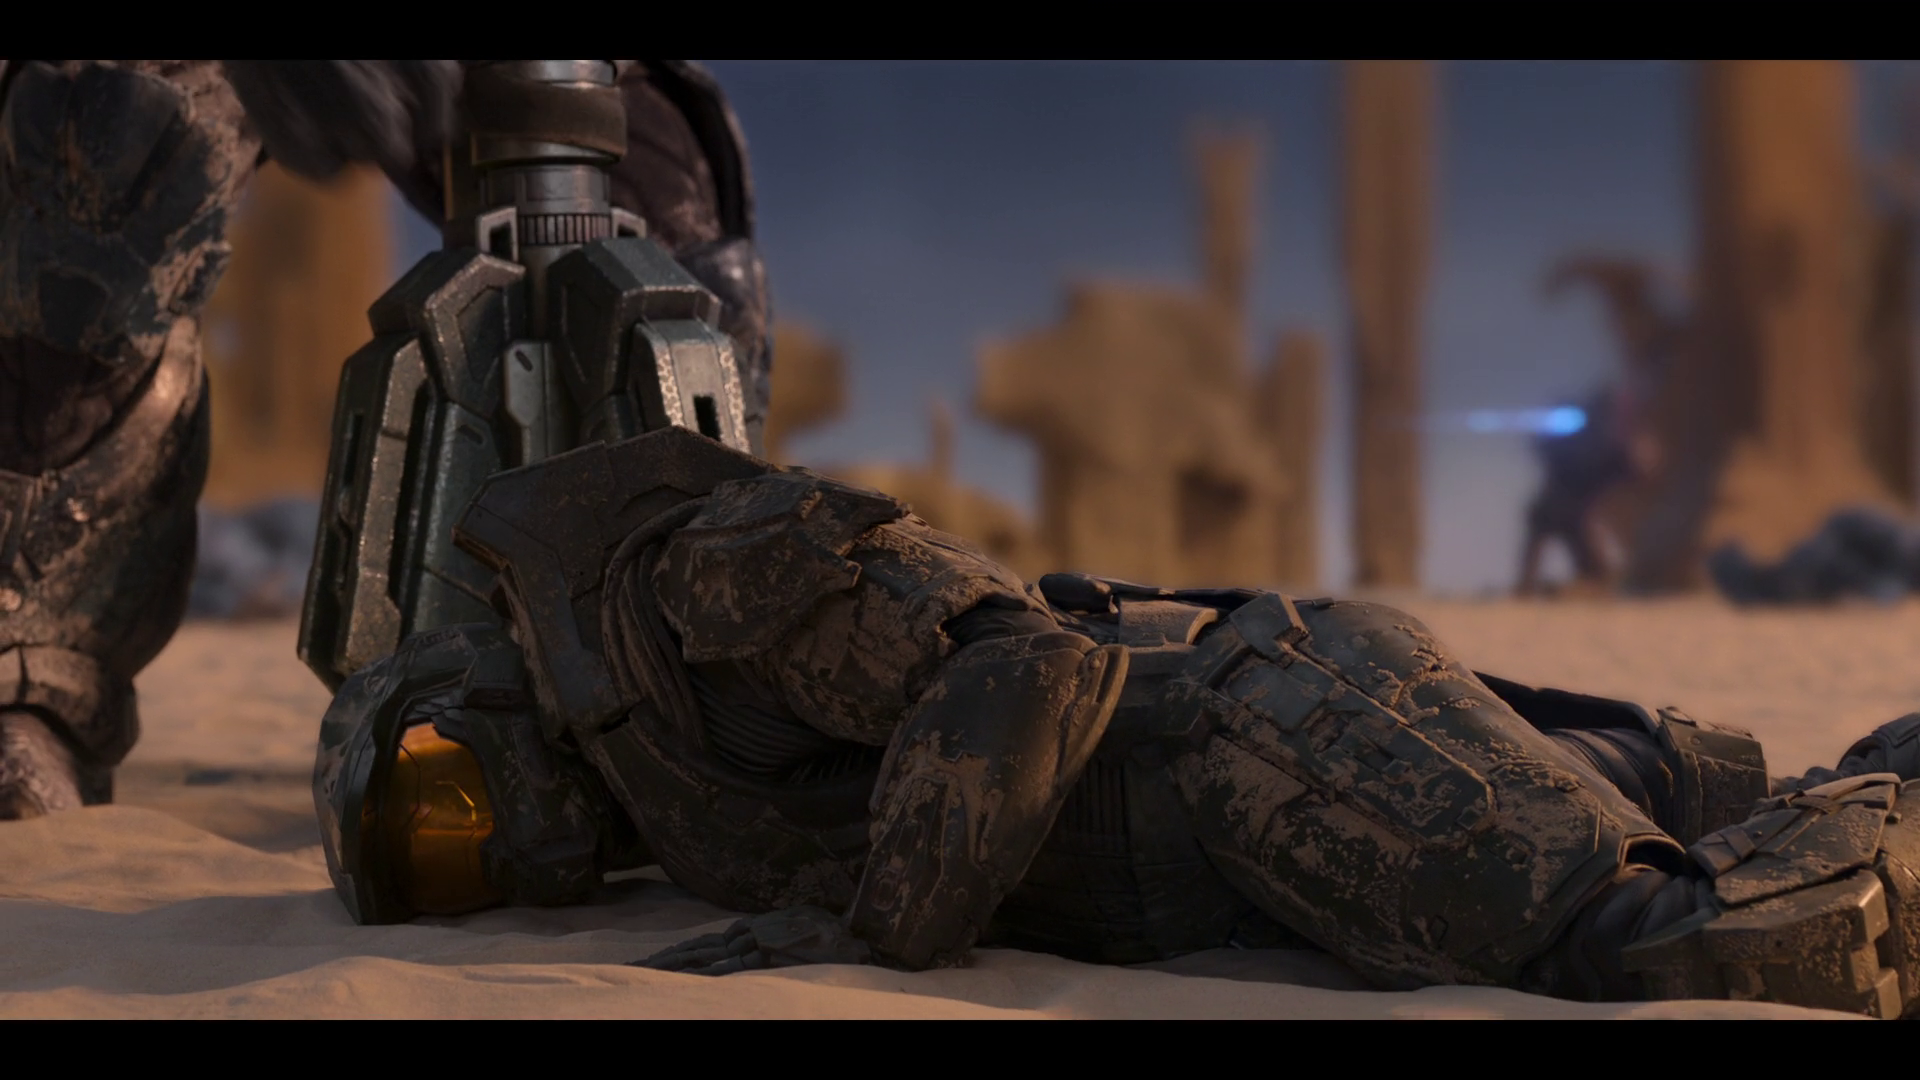 Halo TV show trailer: A new twist on Master Chief's story for